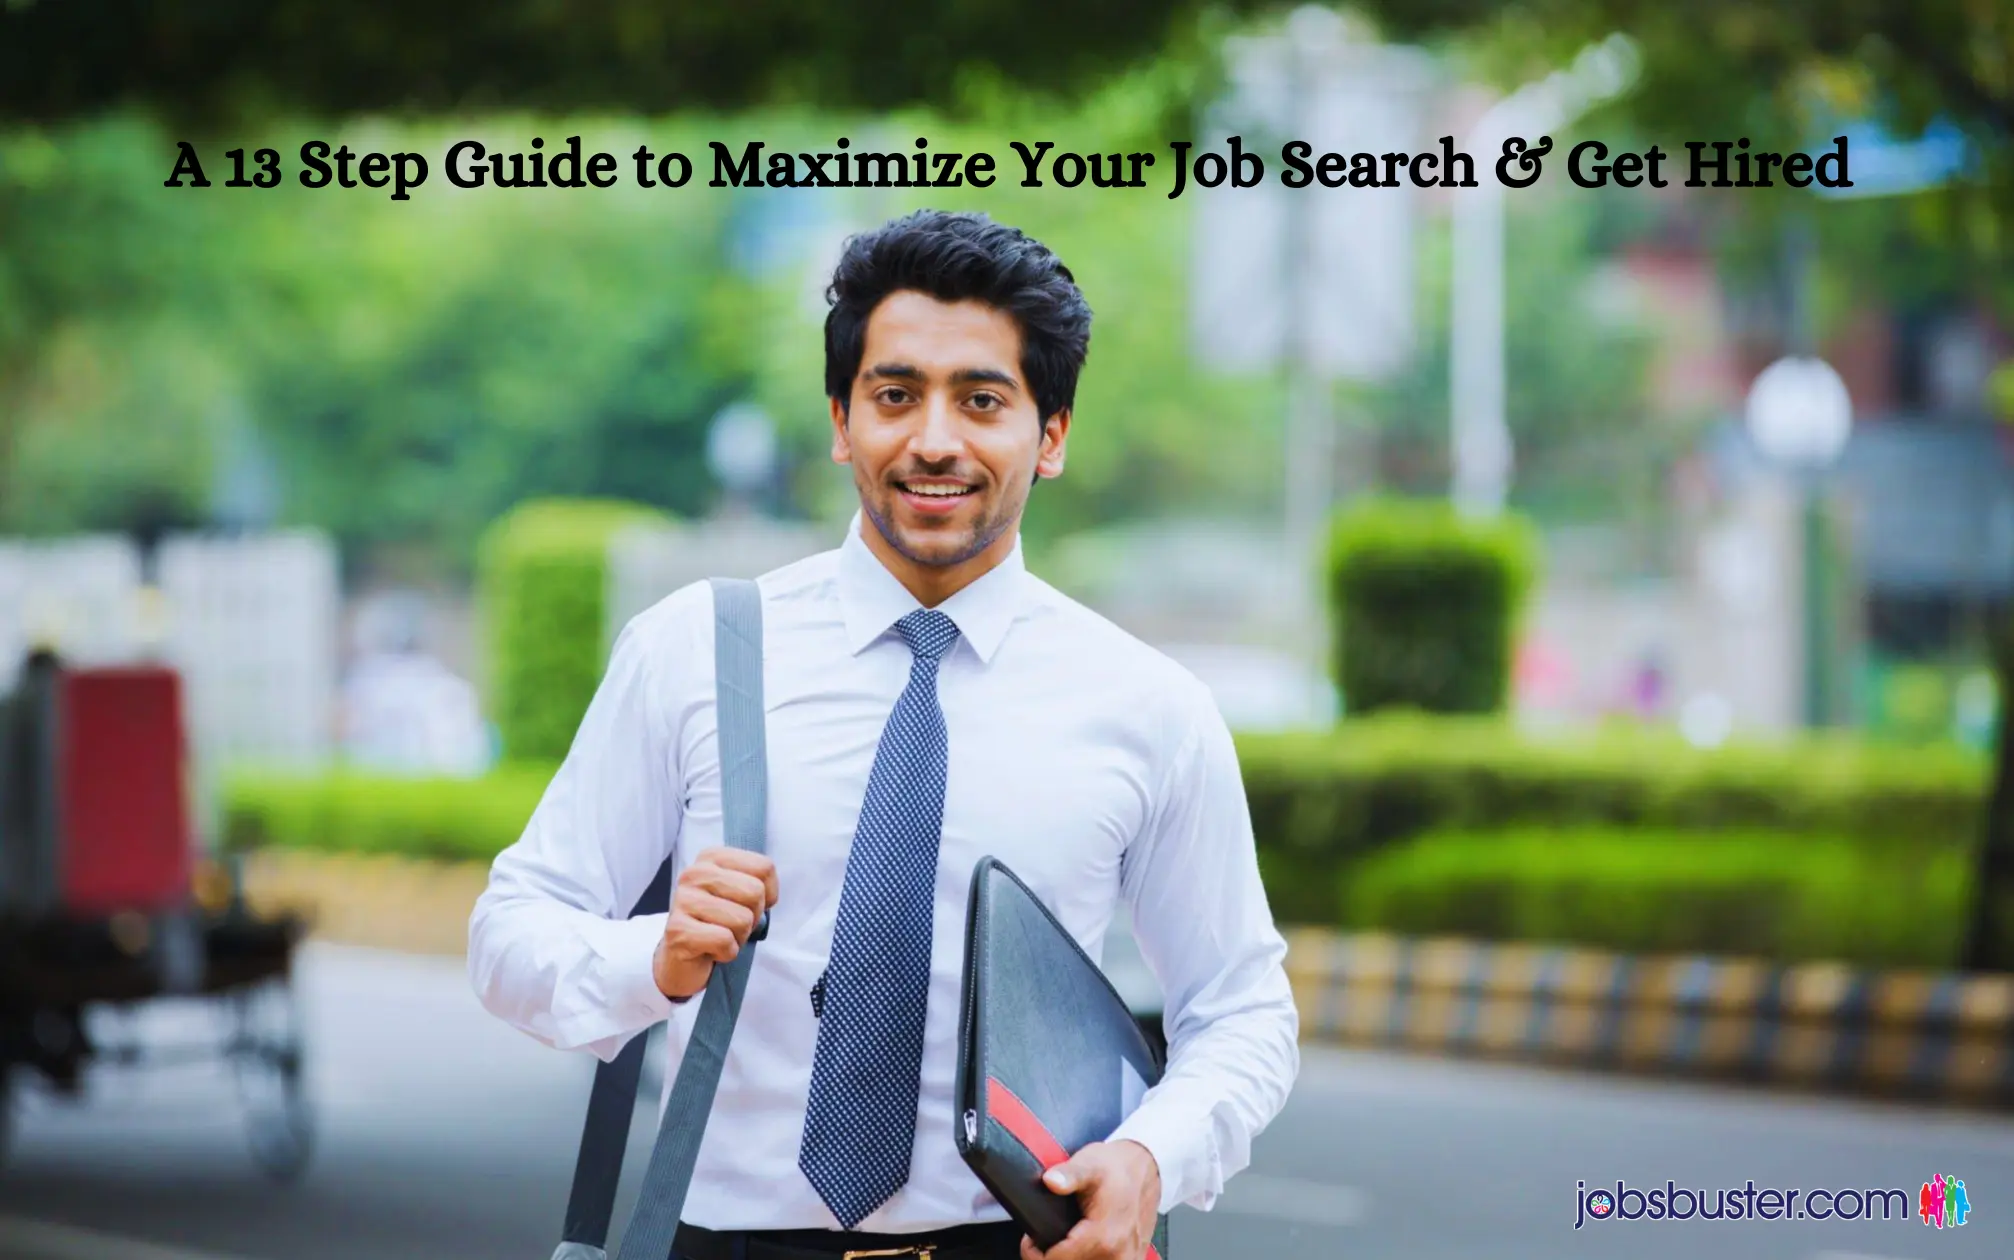 A 13 Step Guide to Maximize Your Job Search & Get Hired